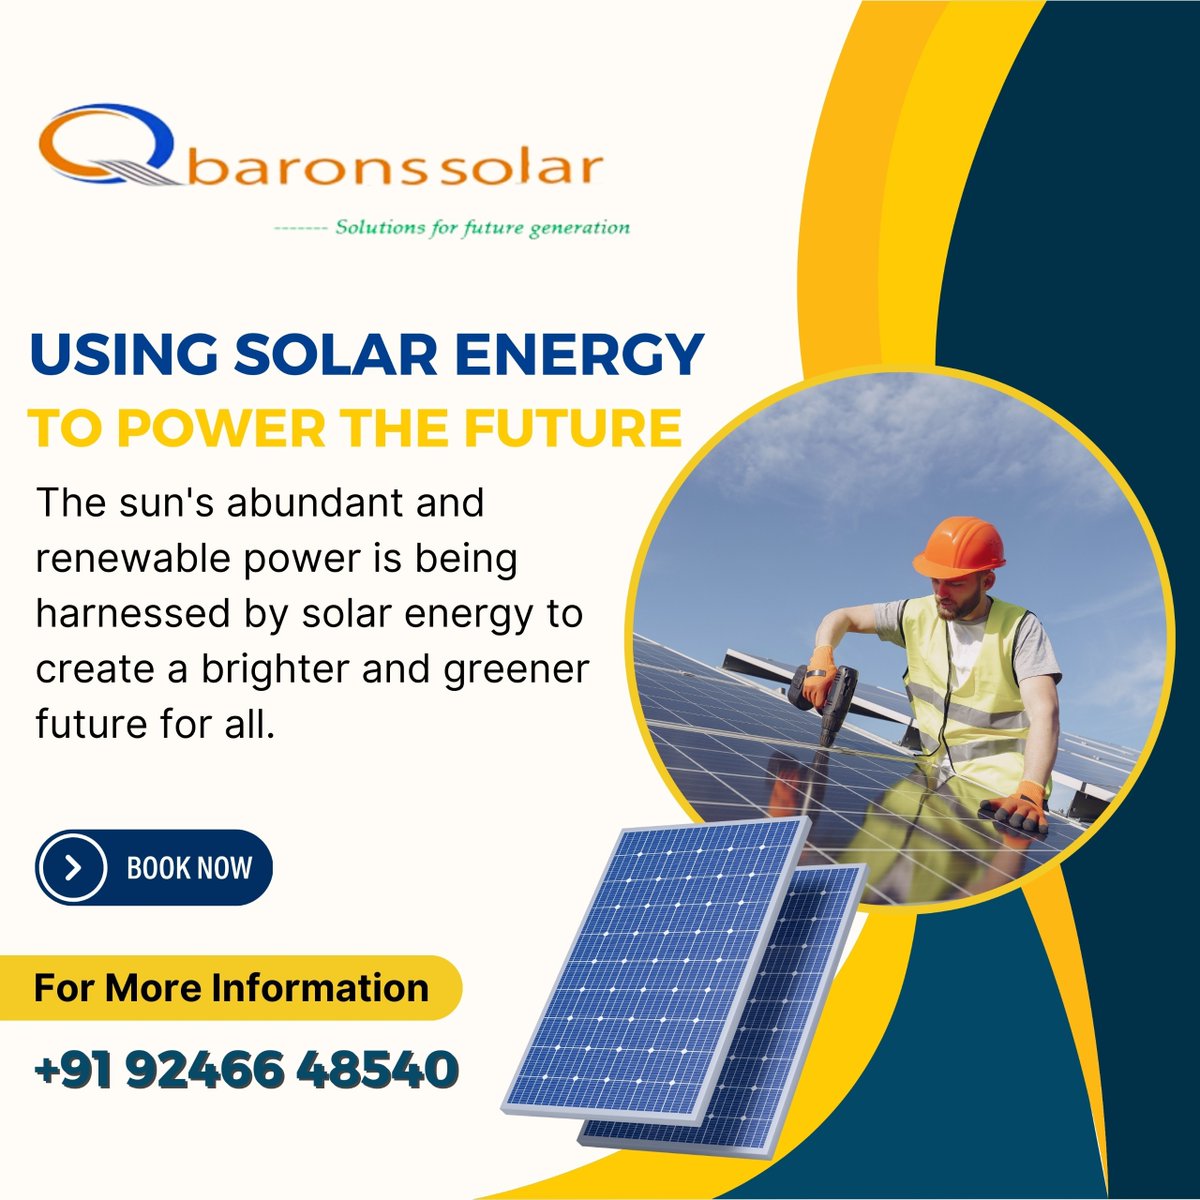 Harness the sun's power for a brighter tomorrow with solar energy! ☀️🌿

🔹 Clean Energy Revolution
🔹 Sustainable Future
🔹 Solar Power Dominance

Book now for a sustainable future! For more information, contact: 092466 48540

#SolarEnergy #RenewableFuture #CleanEnergy